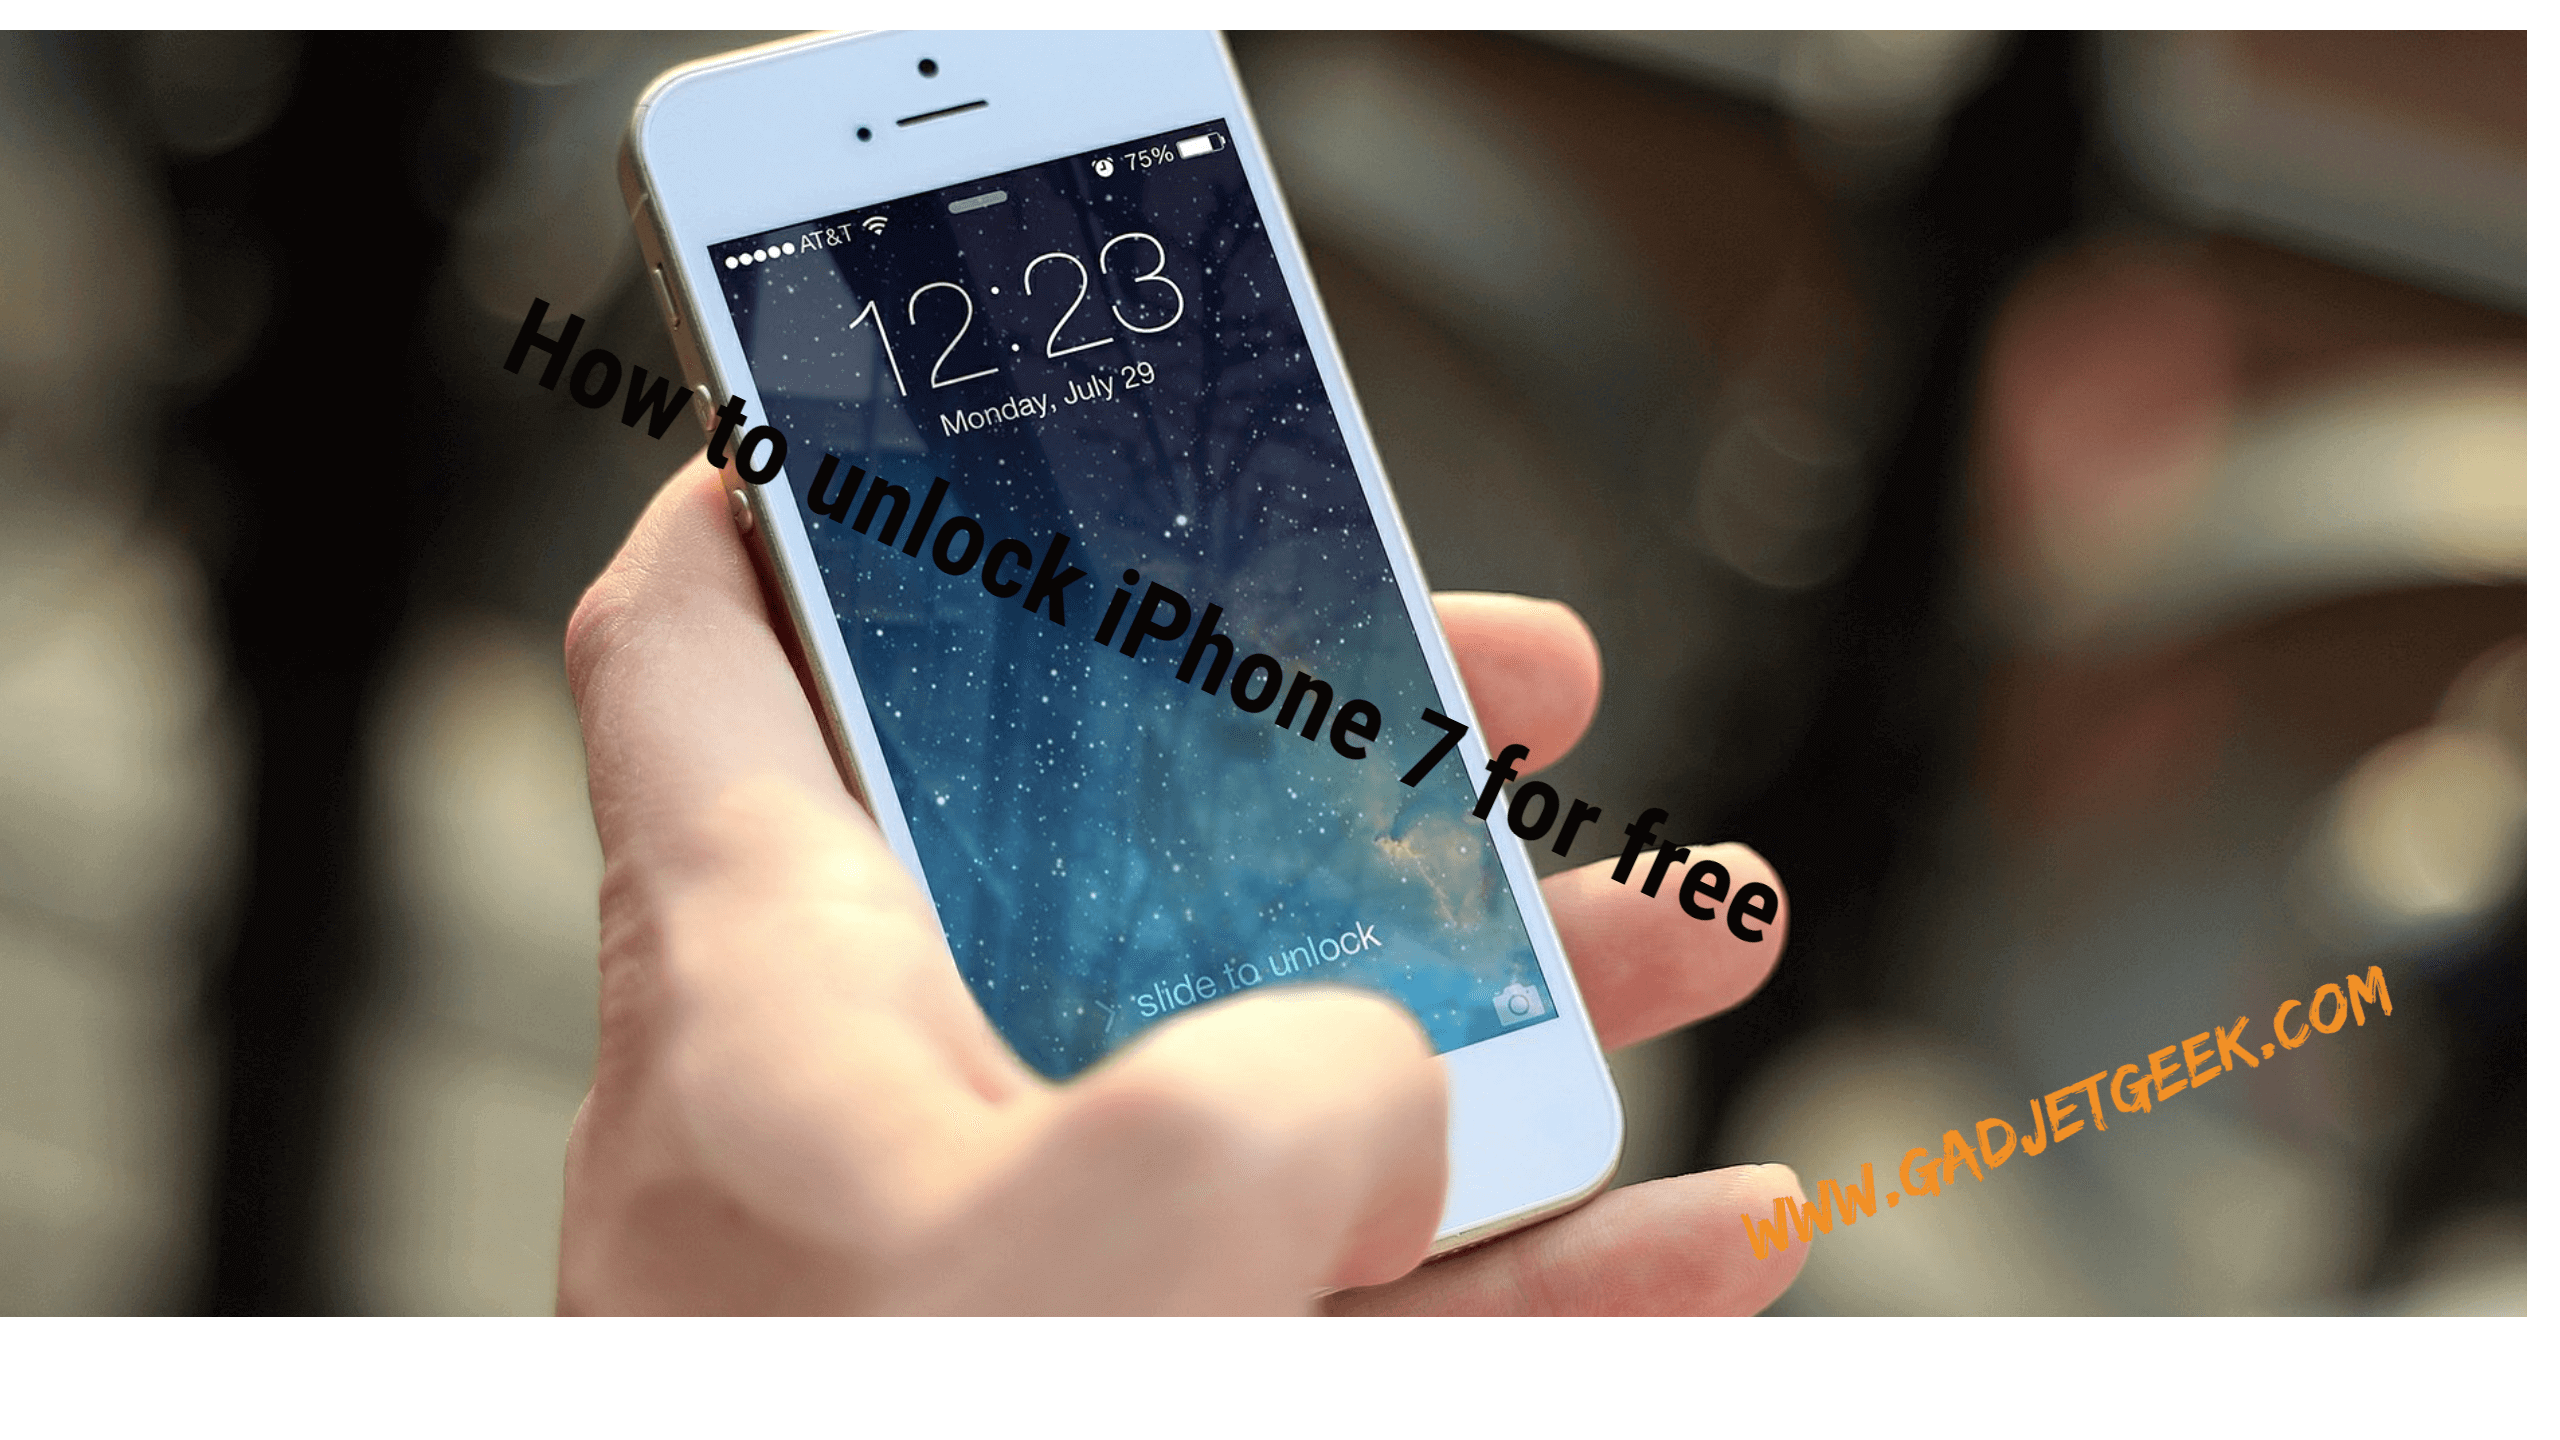 How to unlock iPhone 7 for free 2017